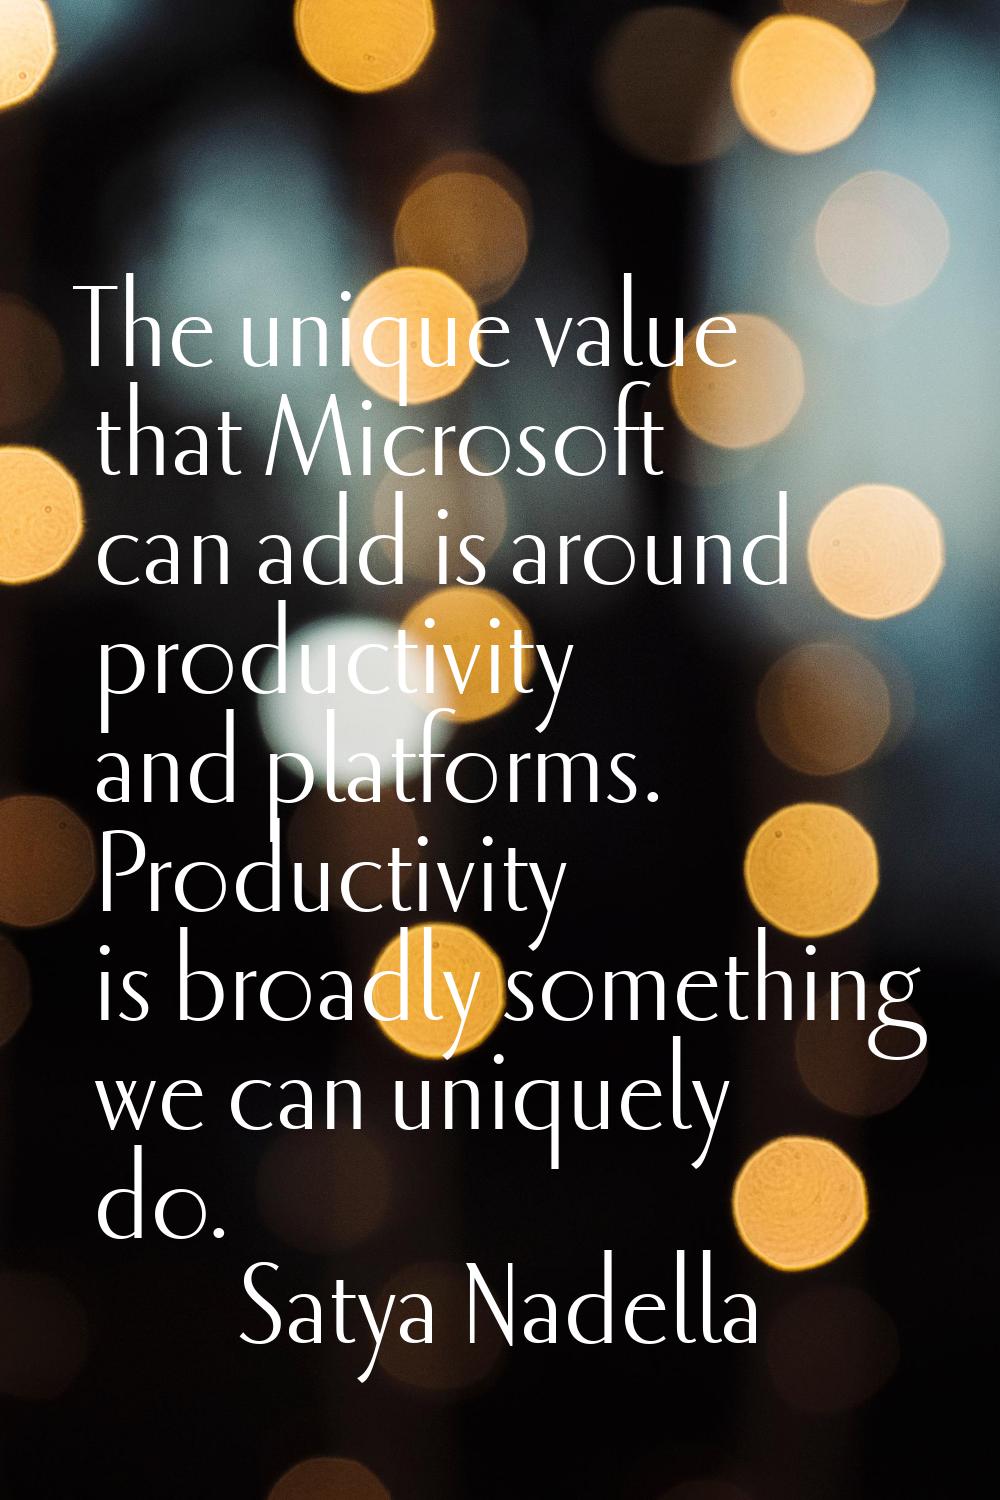 The unique value that Microsoft can add is around productivity and platforms. Productivity is broad